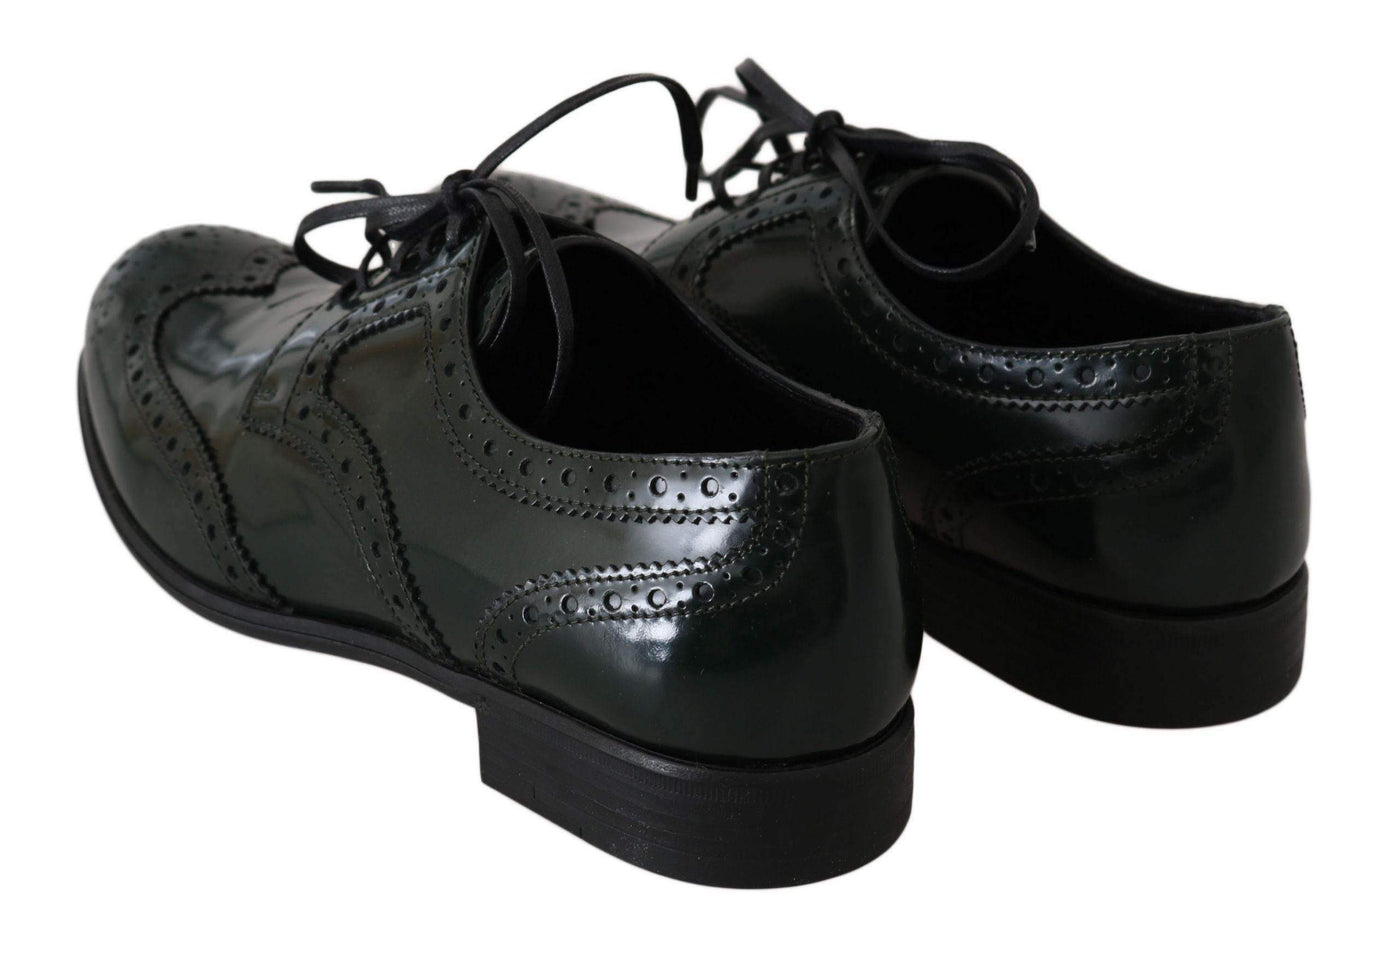 Dolce & Gabbana Green Leather Broque Oxford Wingtip Shoes #women, Boots - Women - Shoes, Brand_Dolce & Gabbana, Catch, Category_Shoes, Dolce & Gabbana, EU35/US4.5, EU36/US5.5, EU37.5/US7, feed-agegroup-adult, feed-color-green, feed-gender-female, feed-size-US4.5, feed-size-US5.5, feed-size-US7, Gender_Women, Green, Kogan, Shoes - New Arrivals at SEYMAYKA